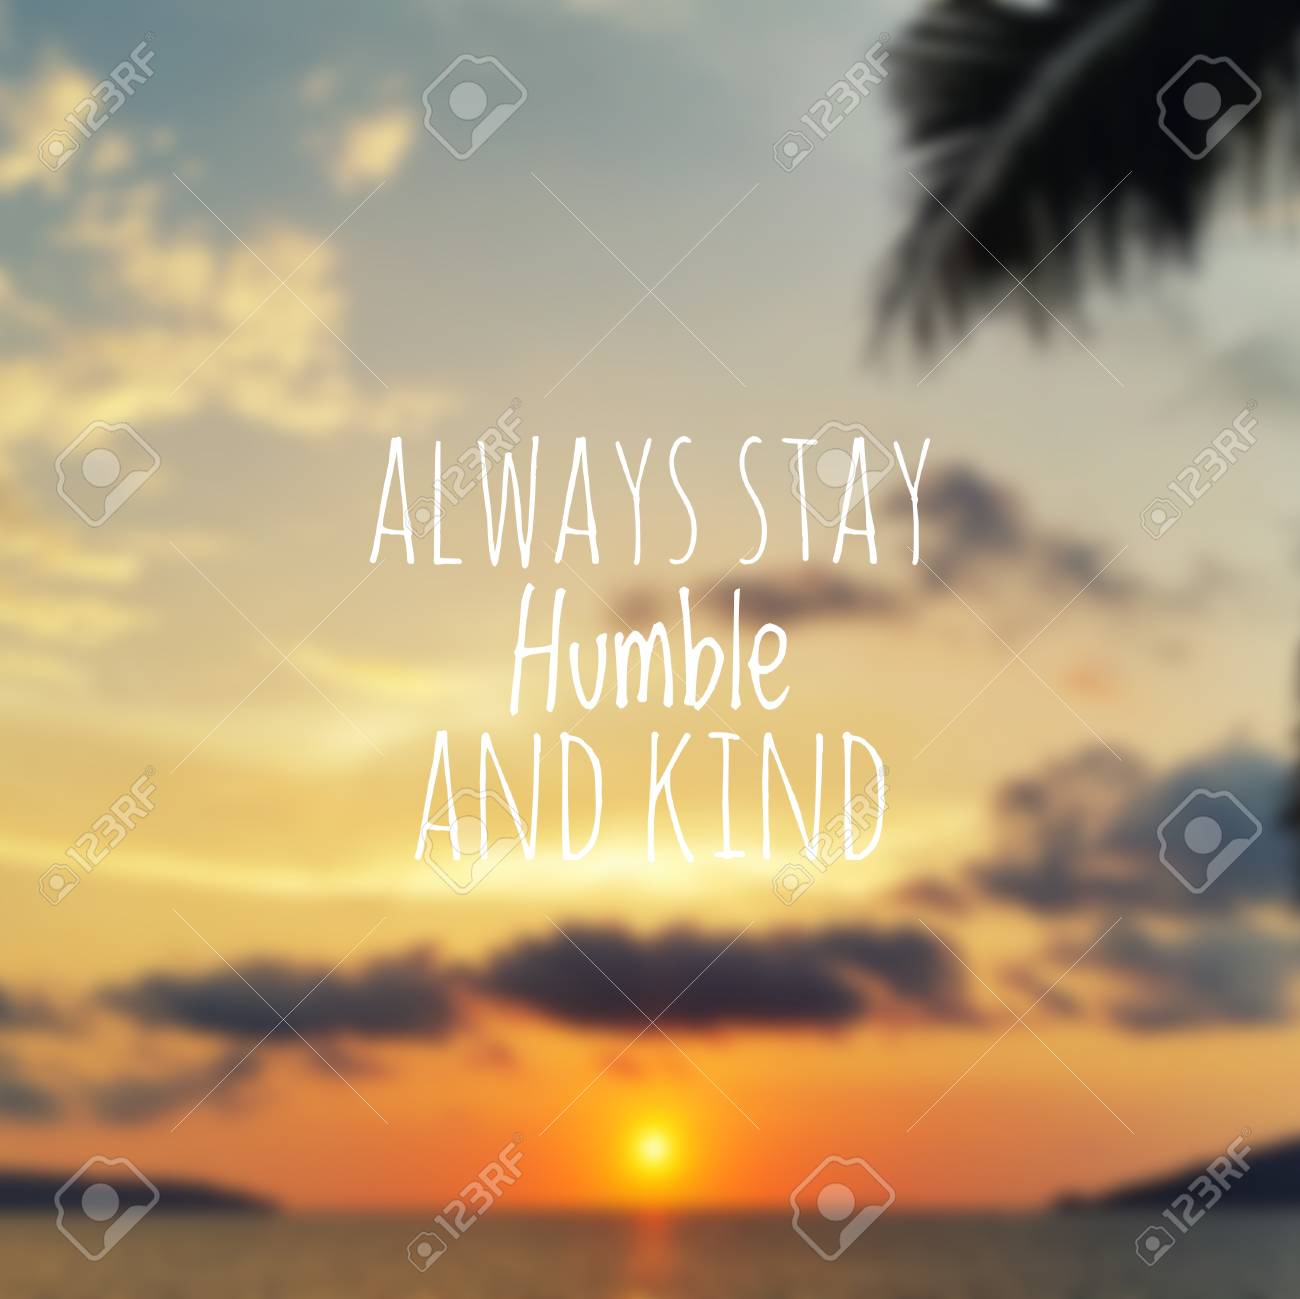 Humble Wallpapers